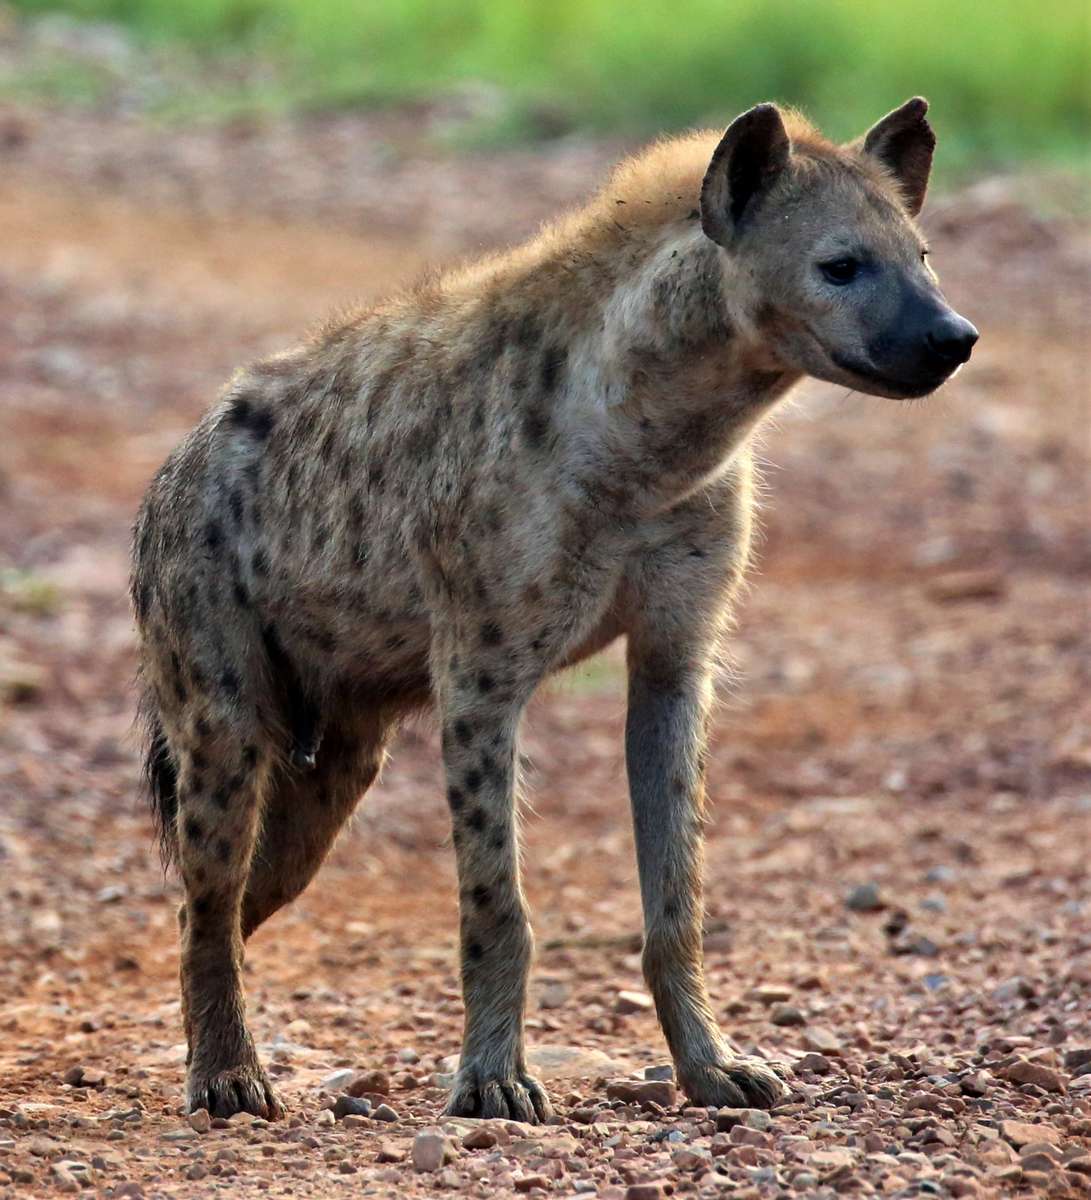 Hyena Animal 2 puzzle online from photo